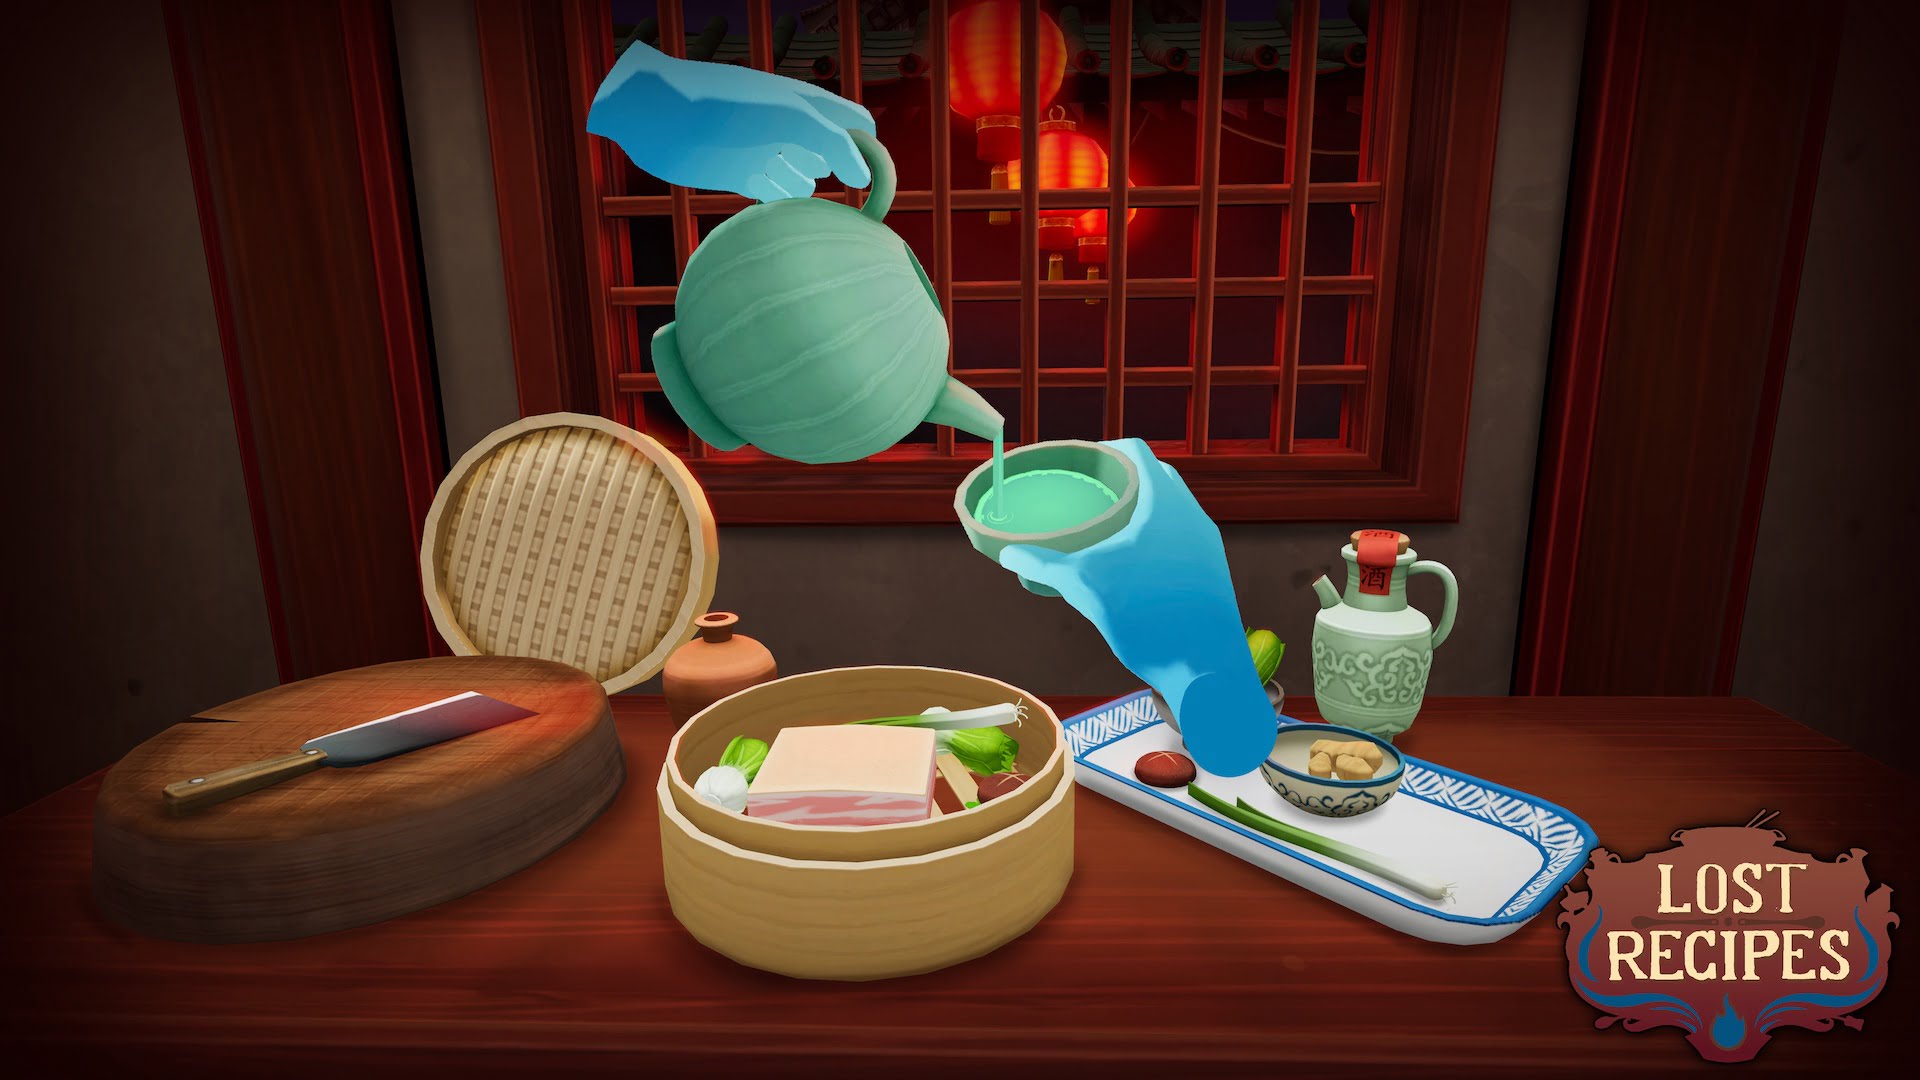 Meta Quest (2): This VR cooking game has no equal